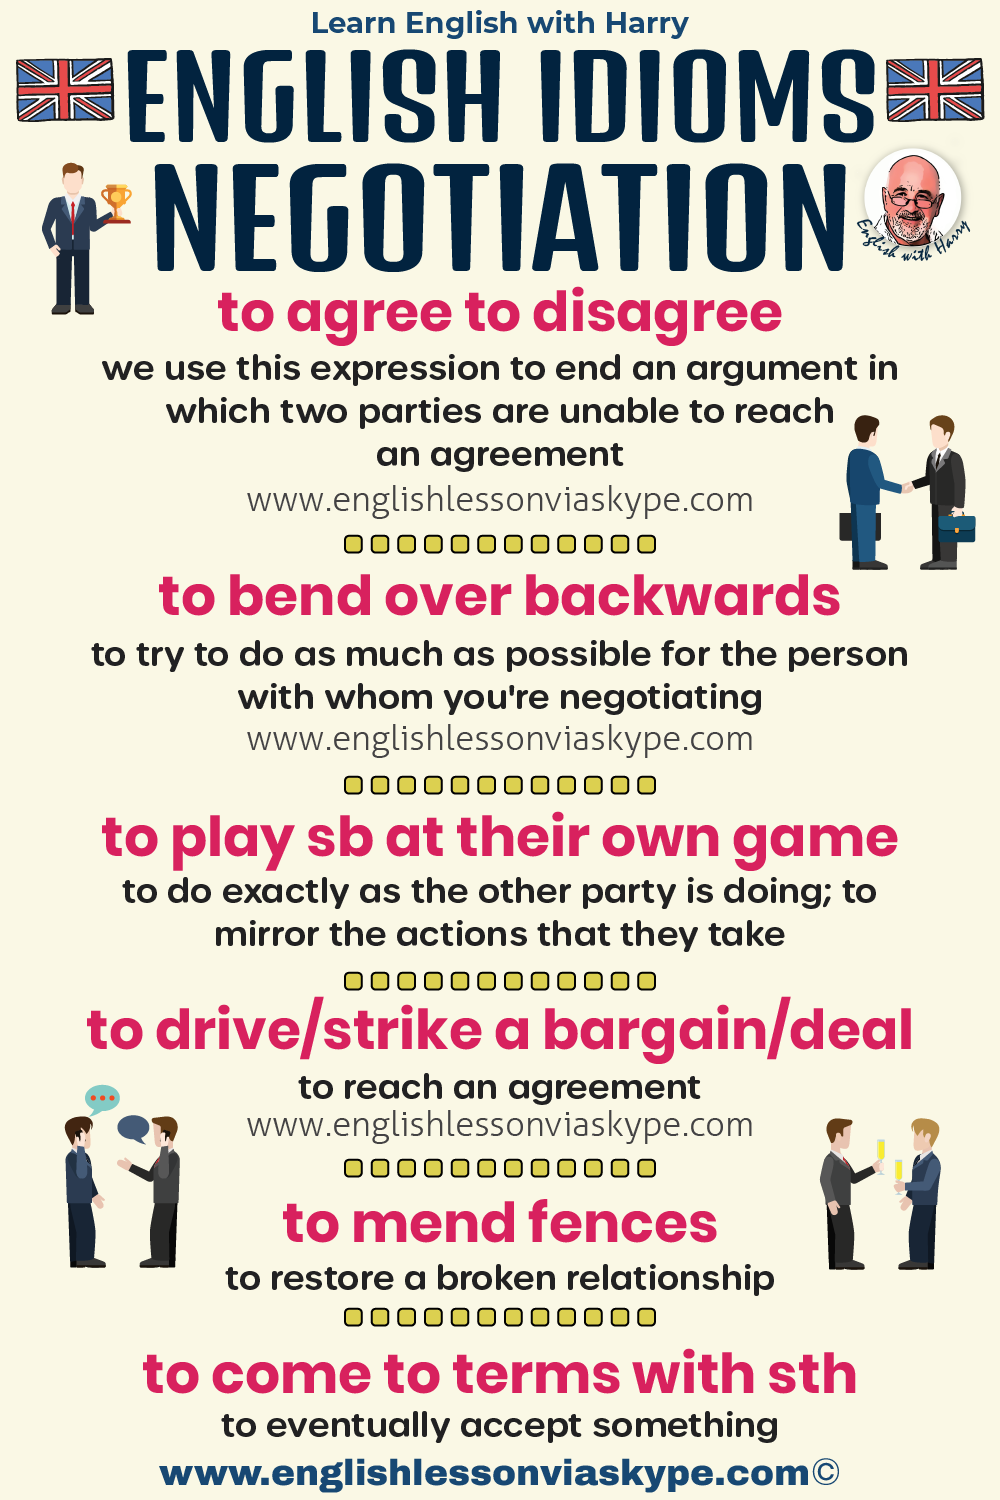 English idioms about negotiation. Advanced English learning. Online English lessons on Zoom at www.englishlessonviaskype.com #learnenglish #englishlessons #EnglishTeacher #vocabulary #ingles